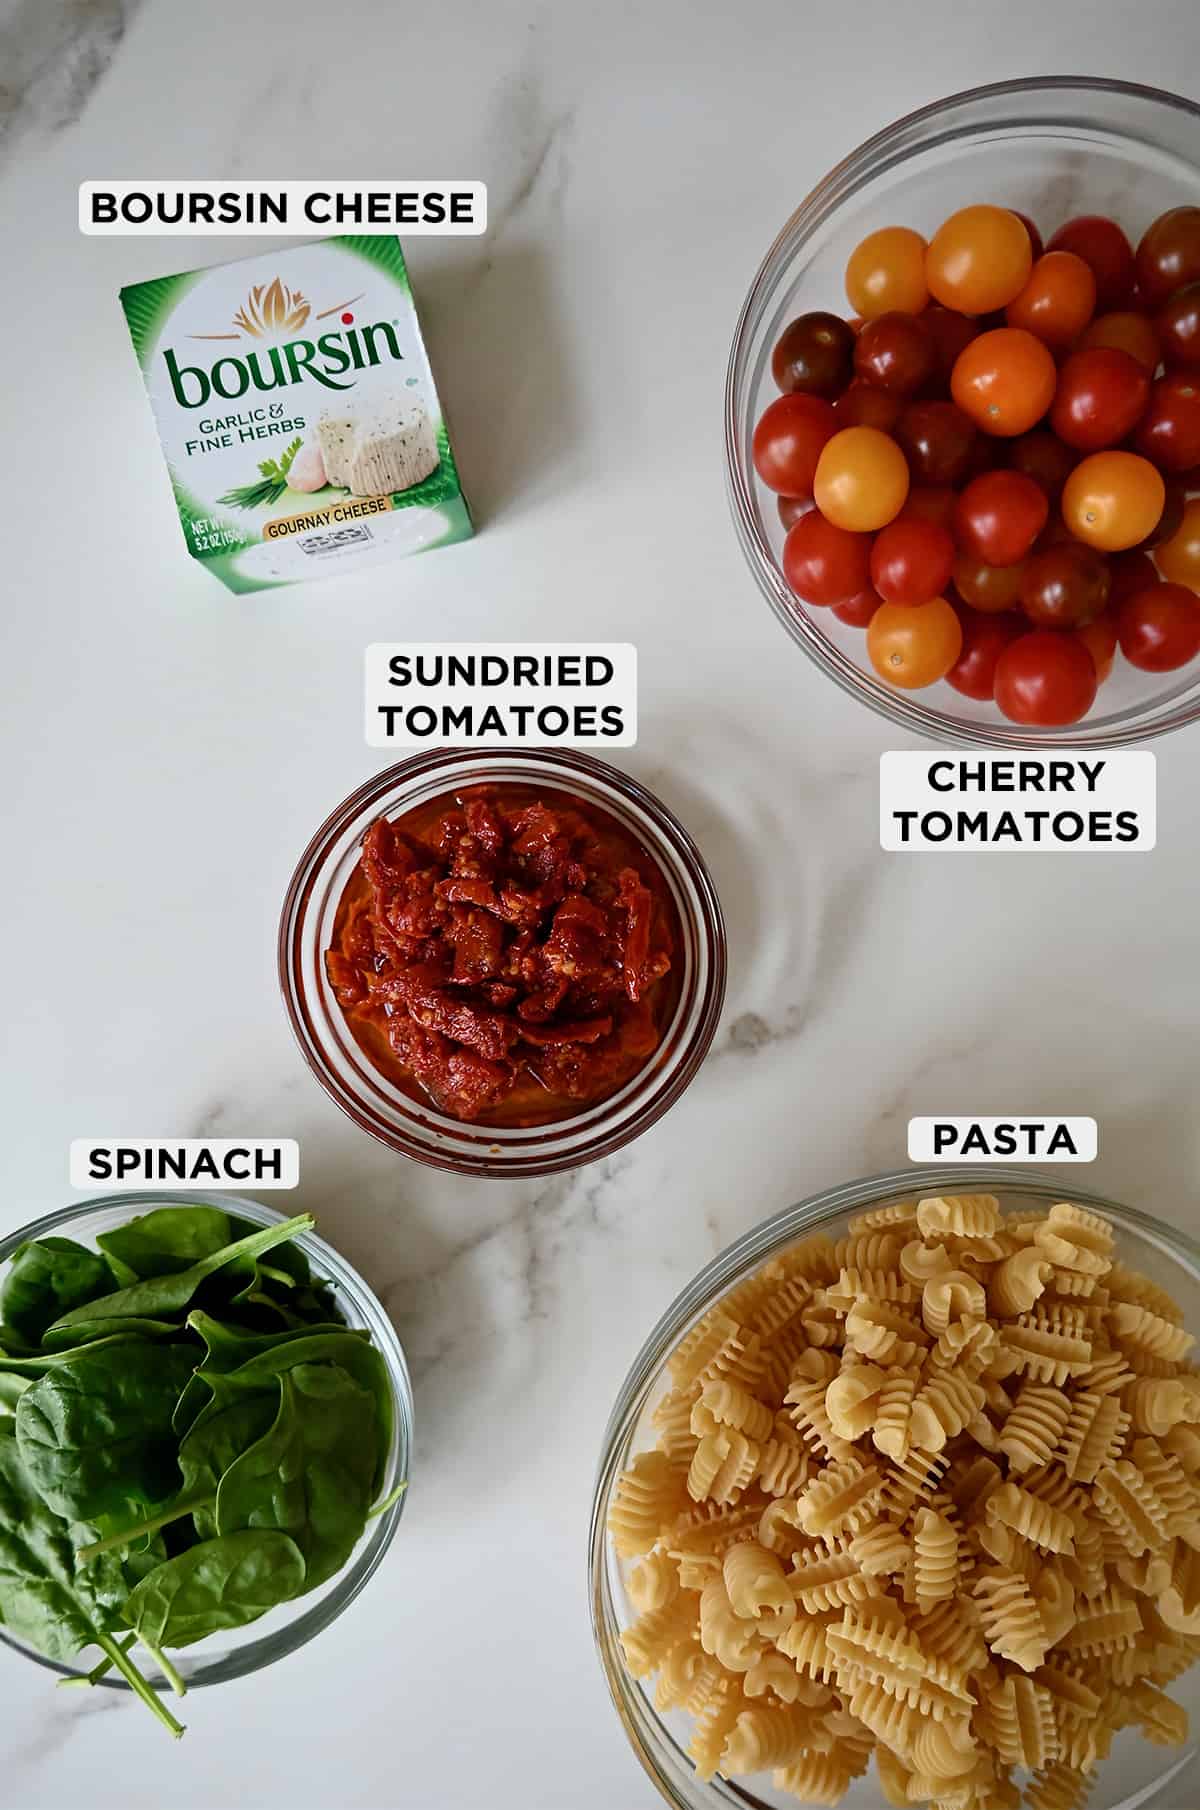 A labeled image of baked pasta ingredients, including Boursin cheese, cherry tomatoes, sun-dried tomatoes, pasta and spinach.